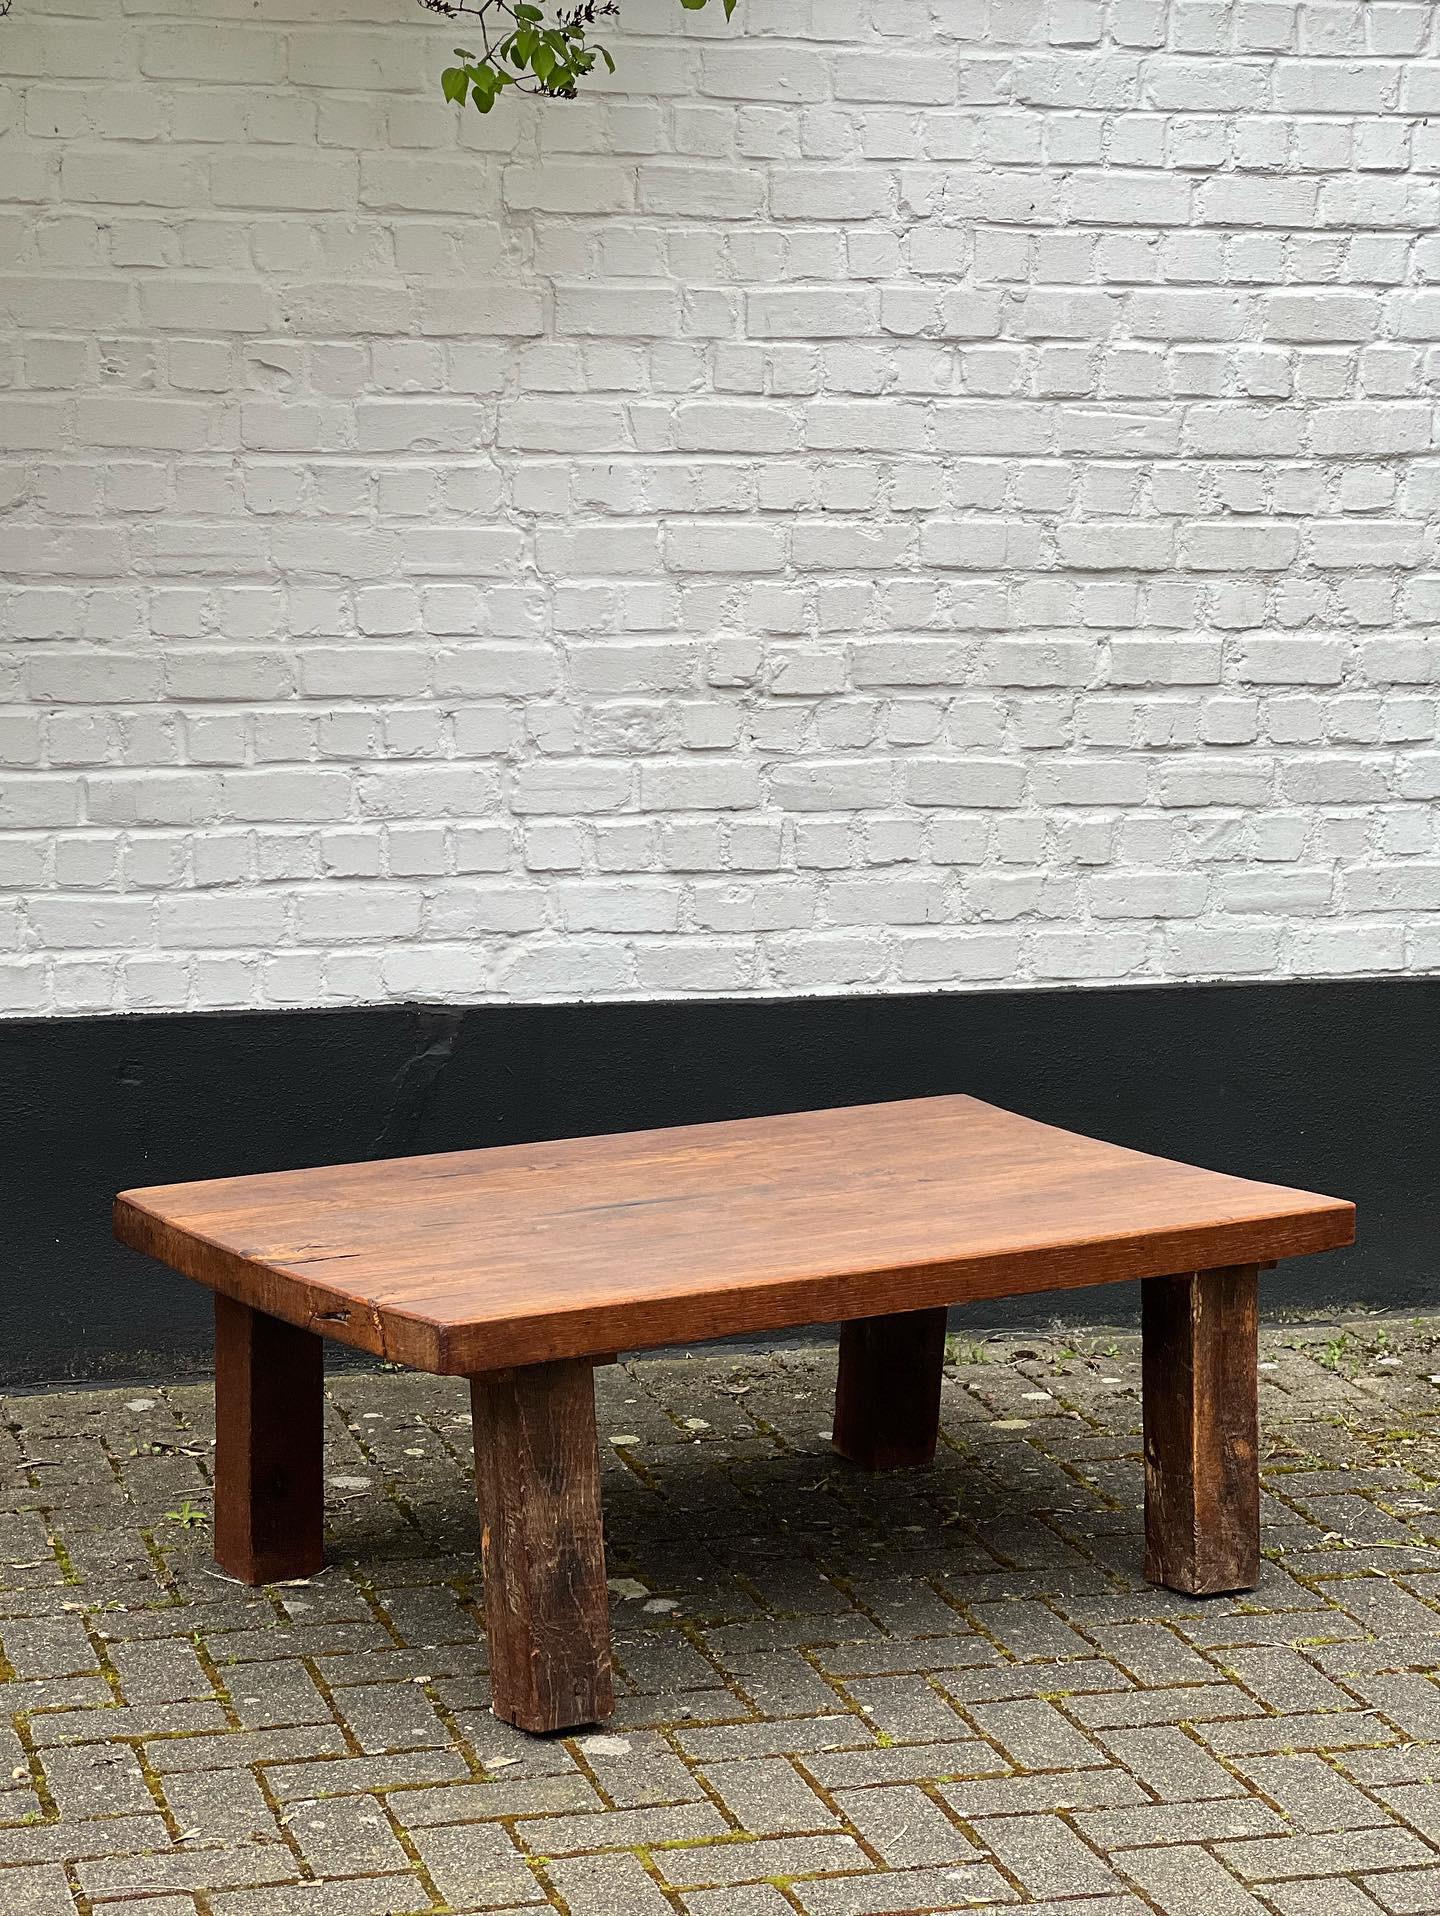 Very unique oak handmade massive slays of tree. The top is patinated and shows various shades of brown/brownish colors and honey tones. Elegant and brutalist describe that table properly. The height is 31.5 cm and is 86 cm x 66 cm. Very strong